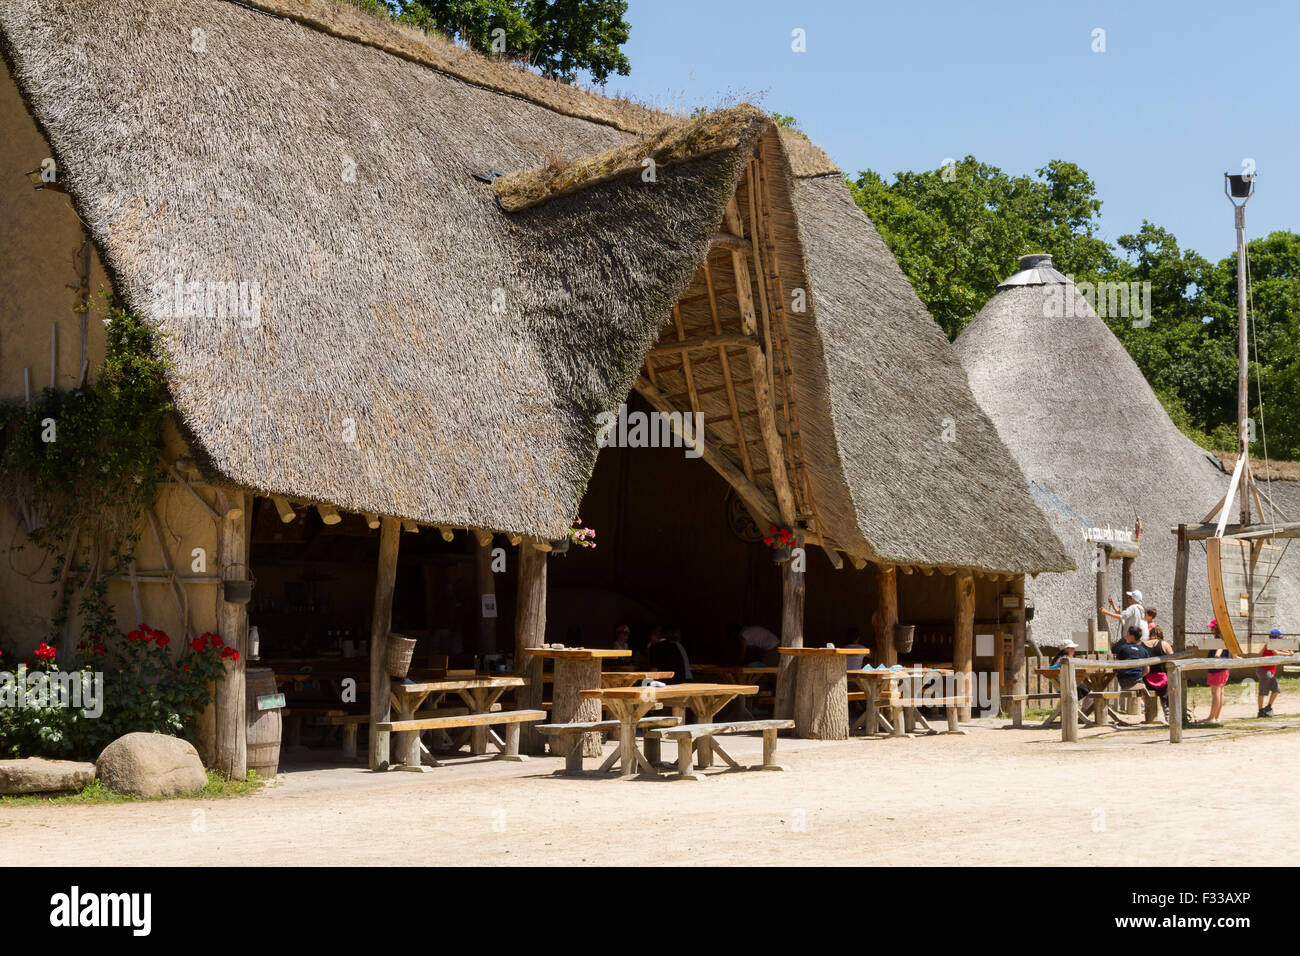 Buildings at Le Village Gaulois, Cotes d'Armor, Brittany, France, Europe. Stock Photo